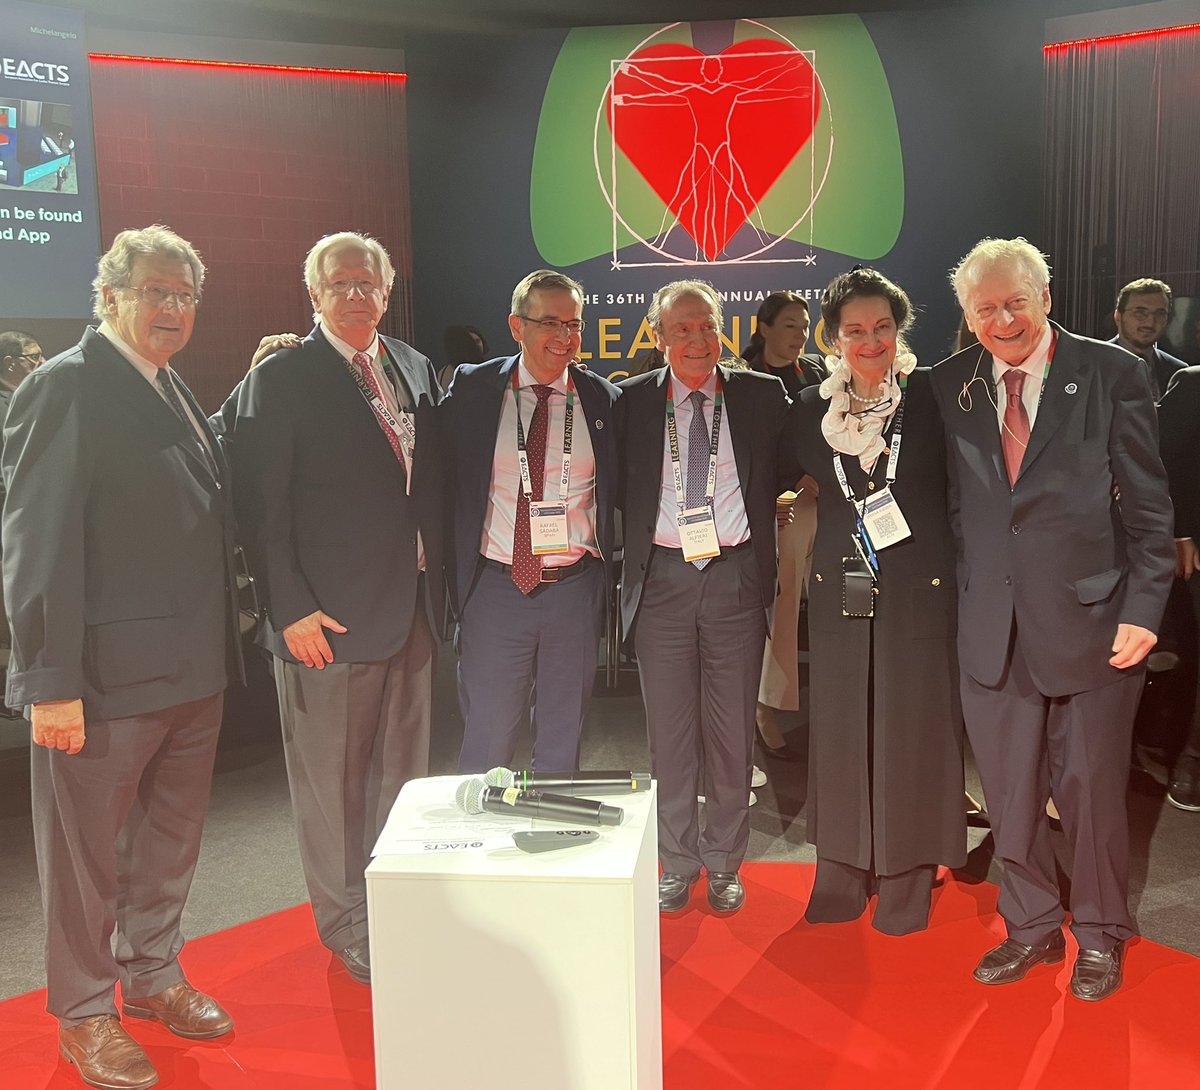 This was a memorable session with the Giants of Cardiac Surgery. A privilege to ear their story and advices. #EACTS2022 @rafasadaba @EACTS